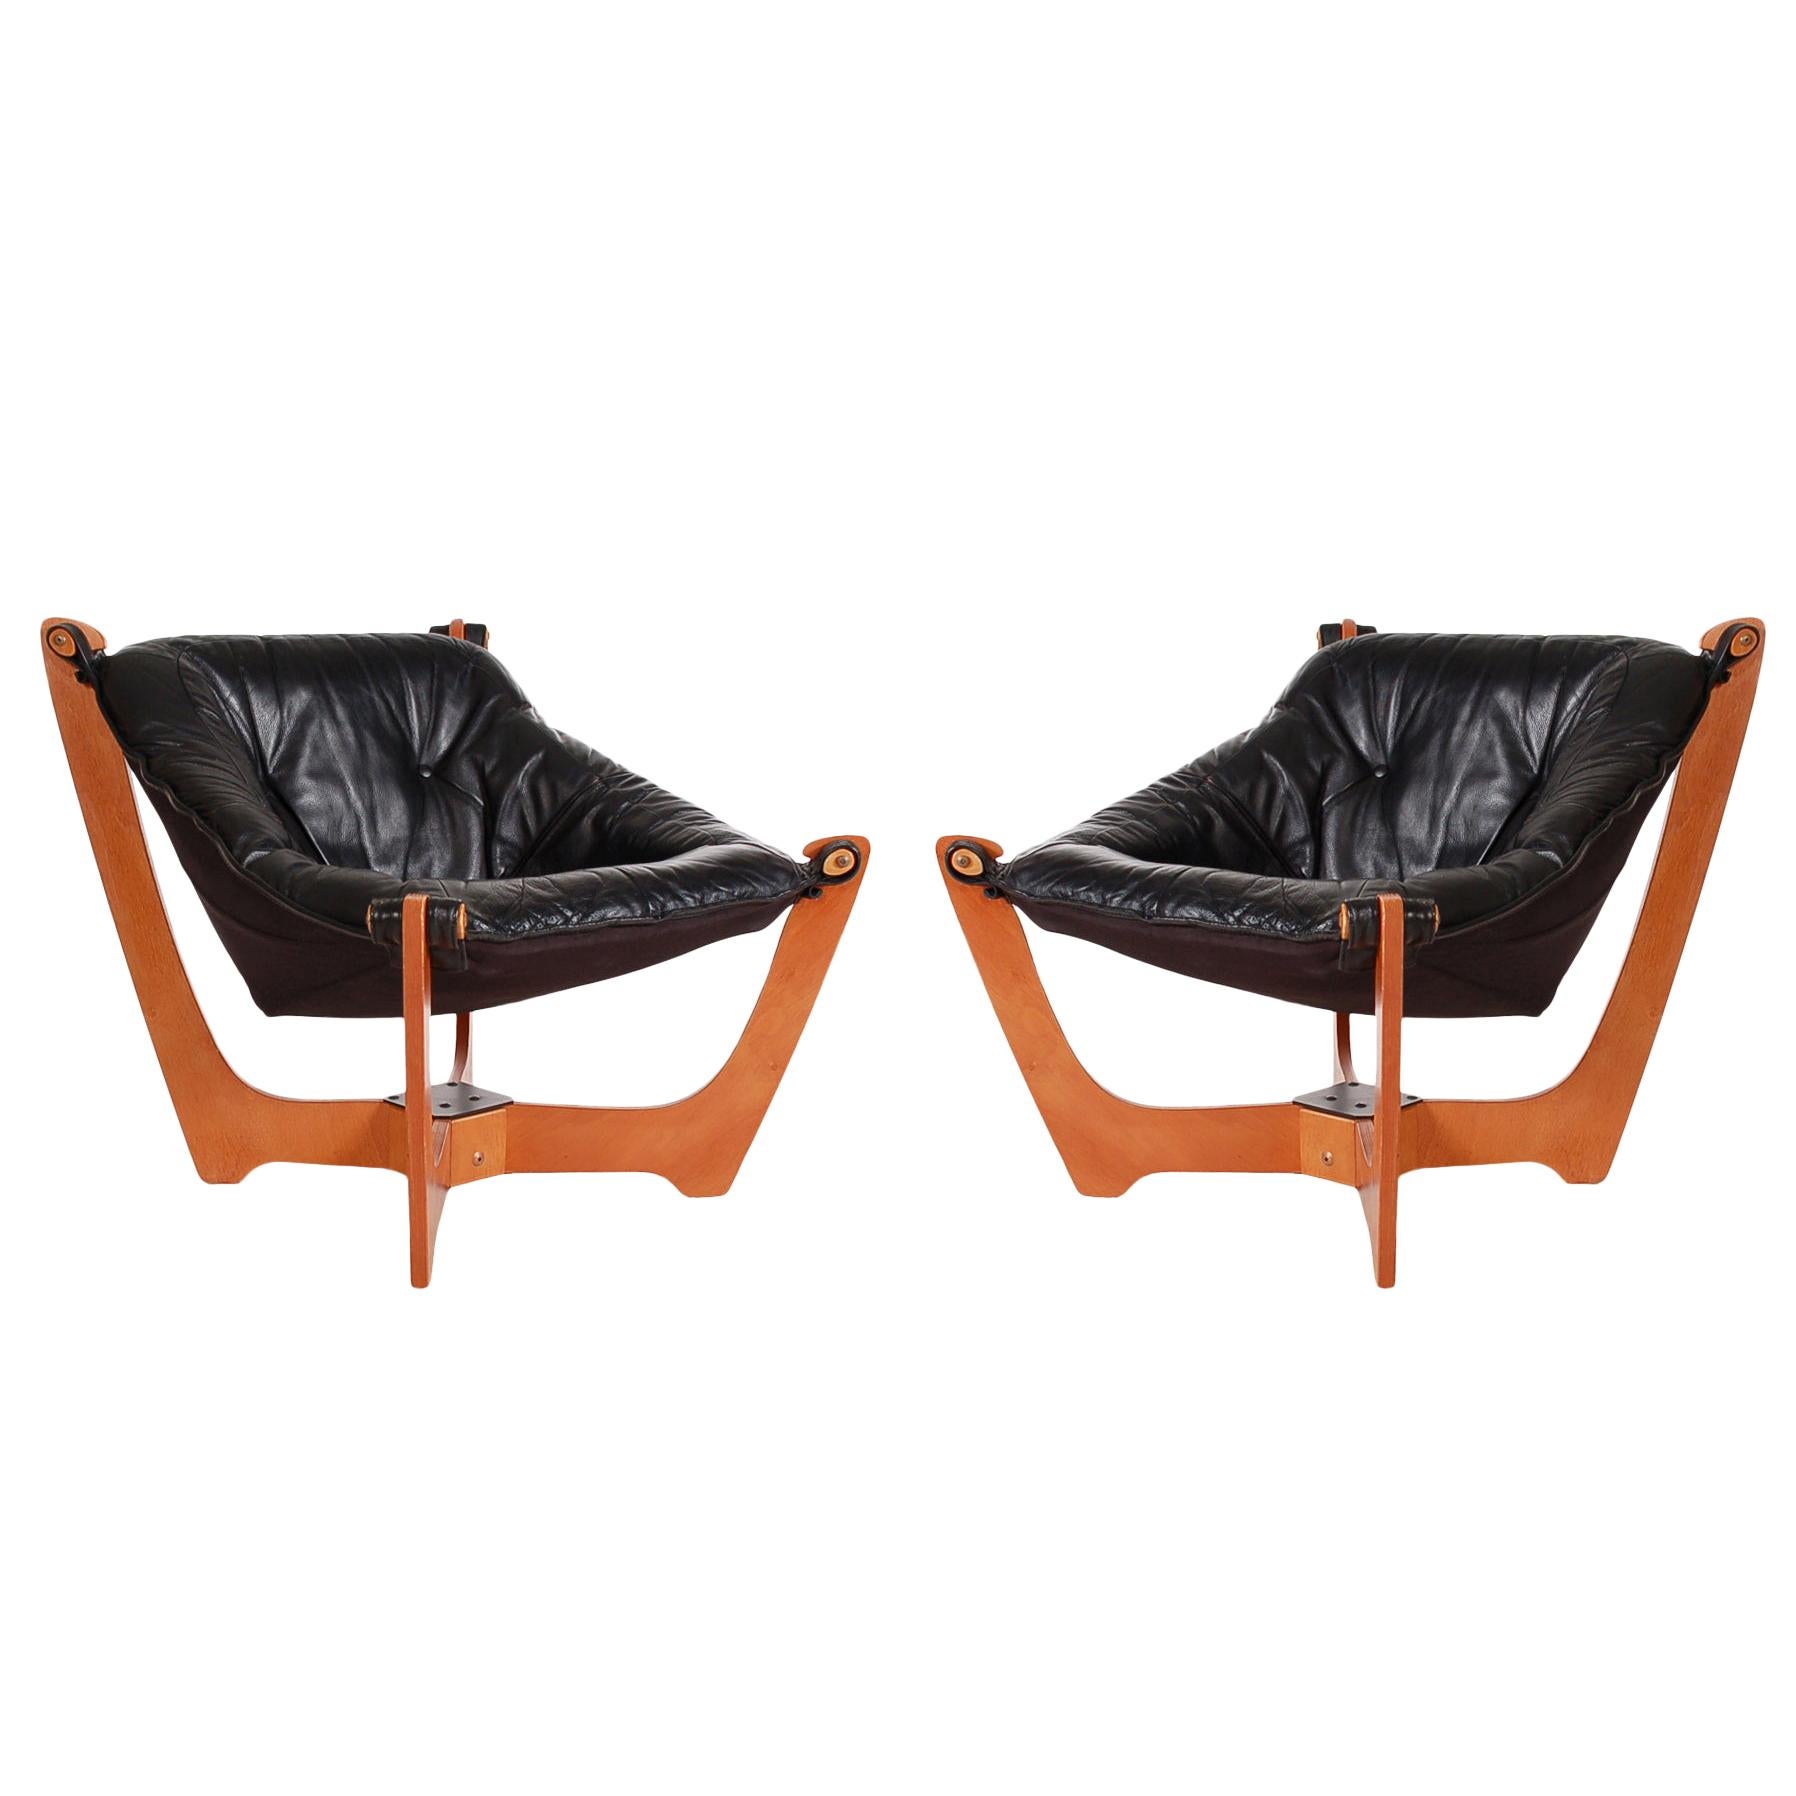 Pair of Midcentury Danish Modern Black Leather Lounge Chairs by Odd Knutsen